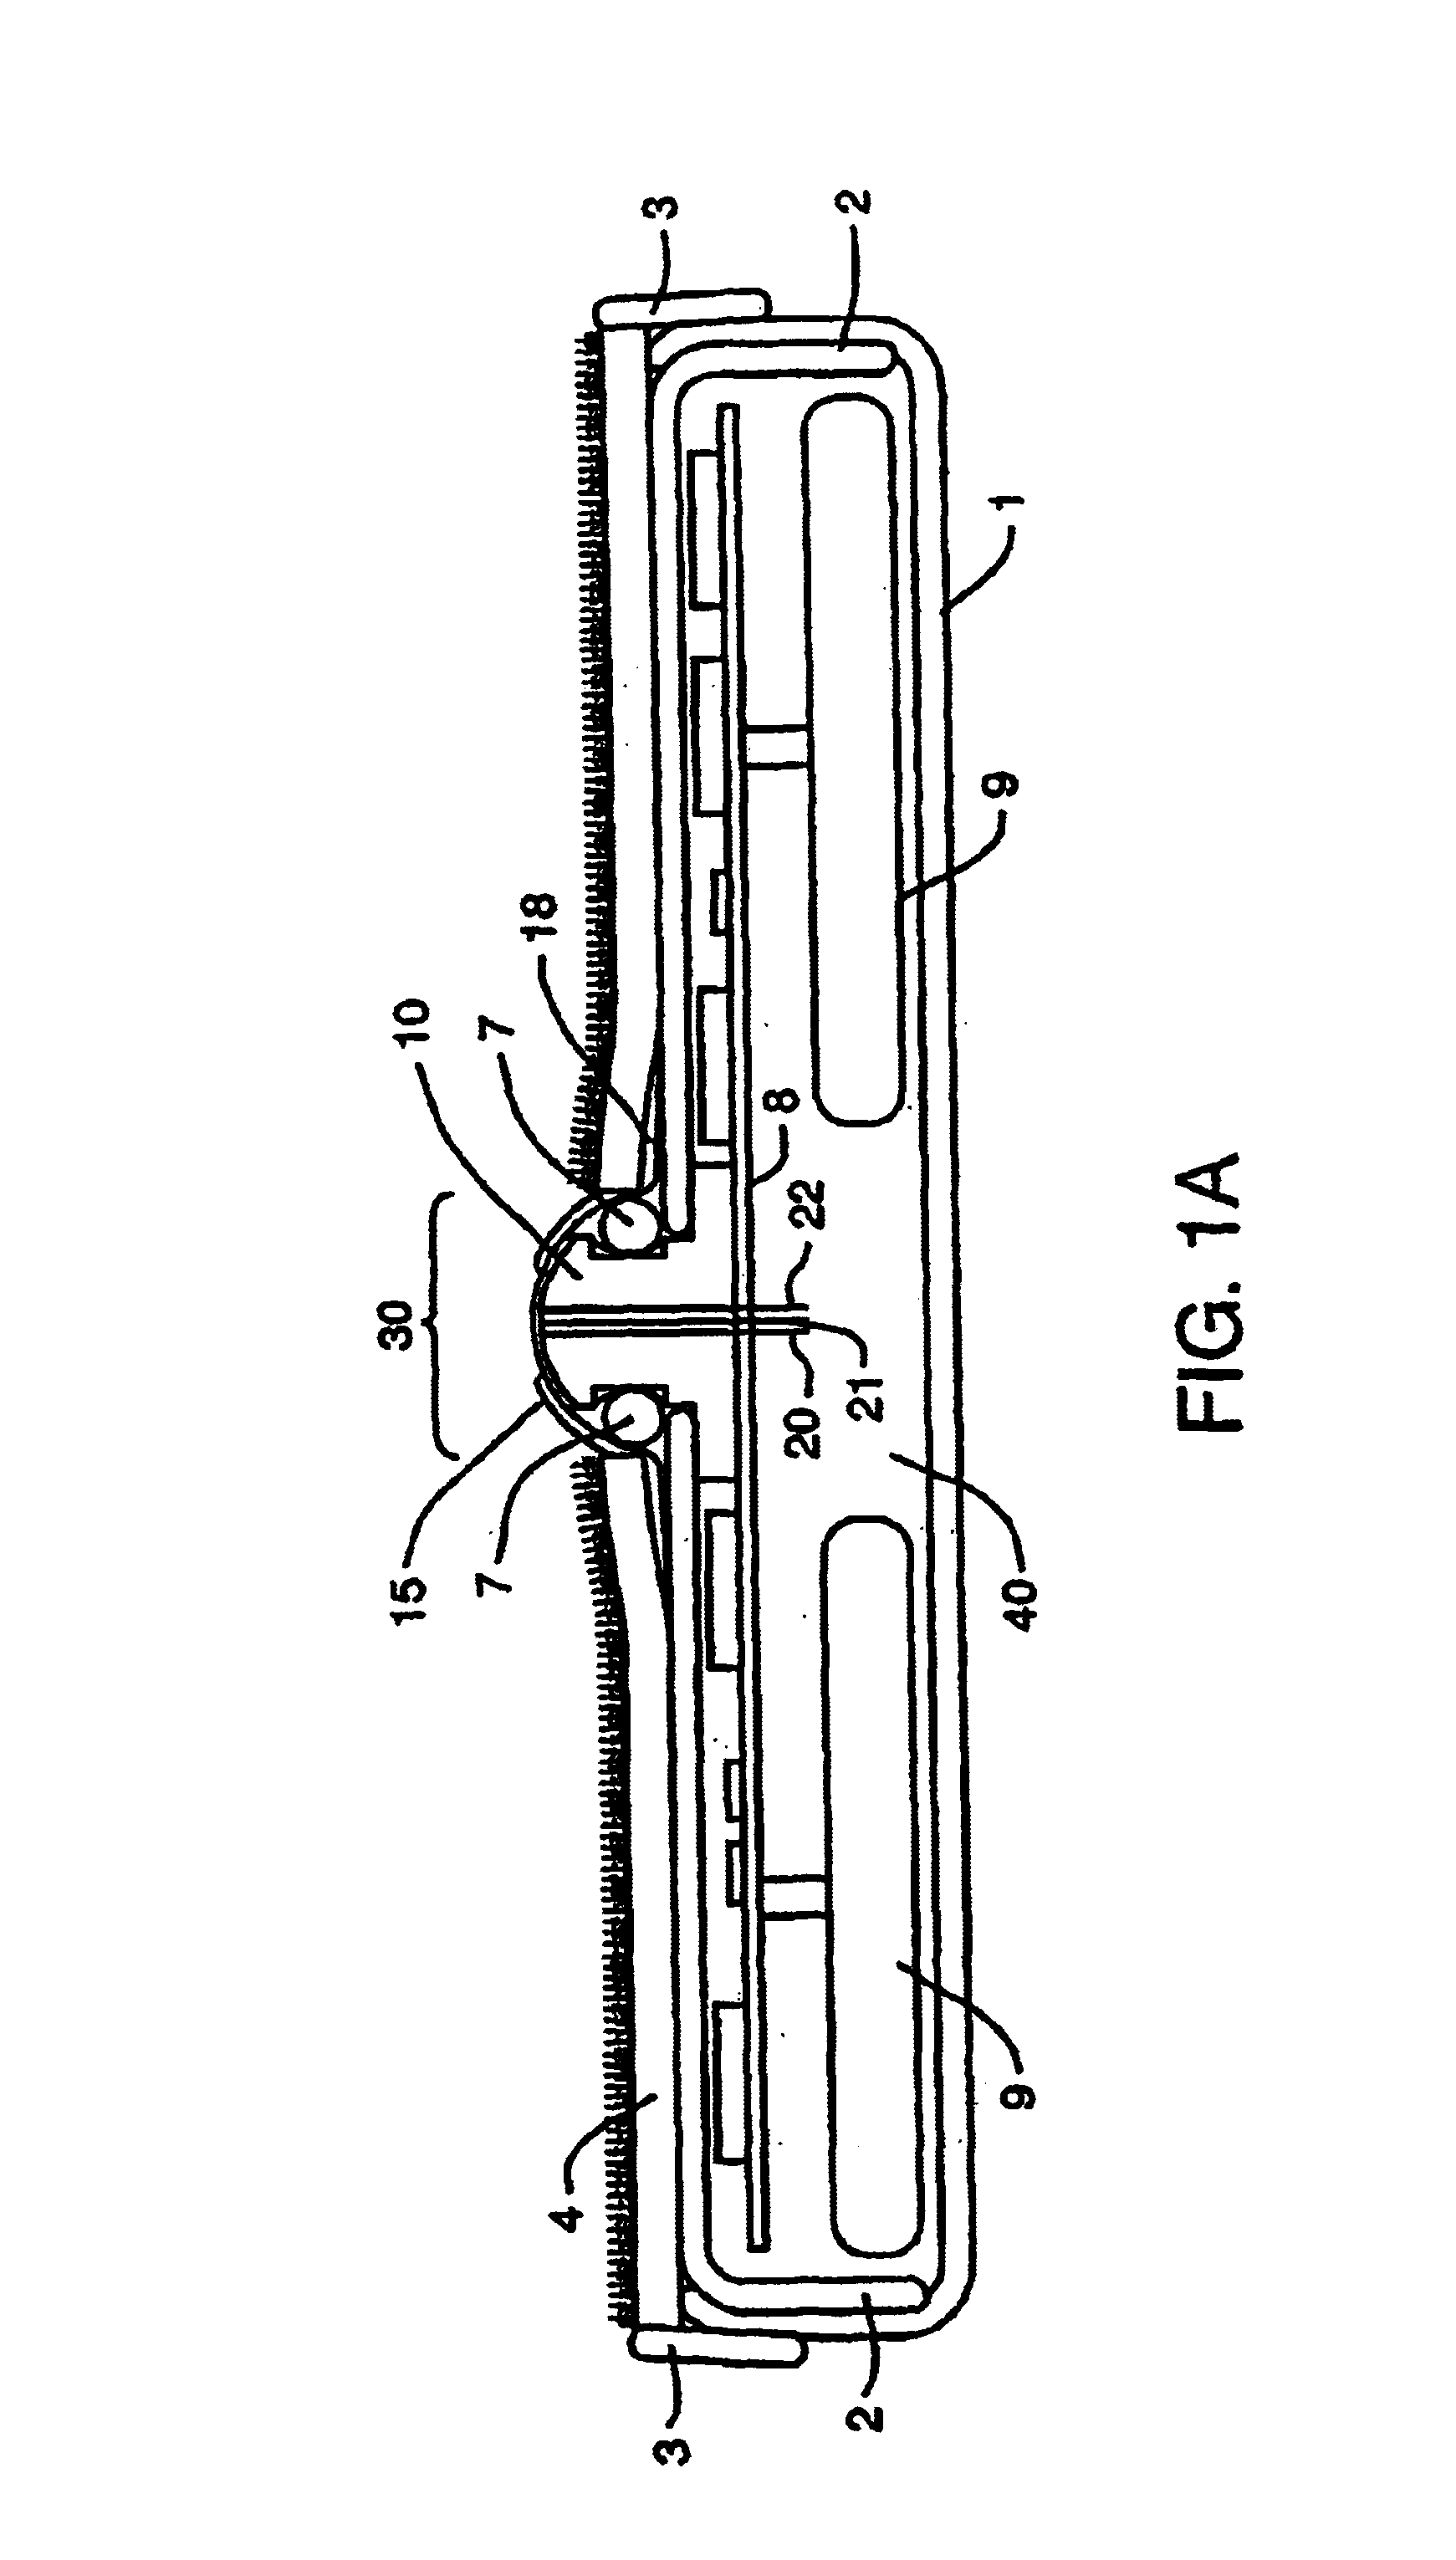 Device and method for determining analyte levels